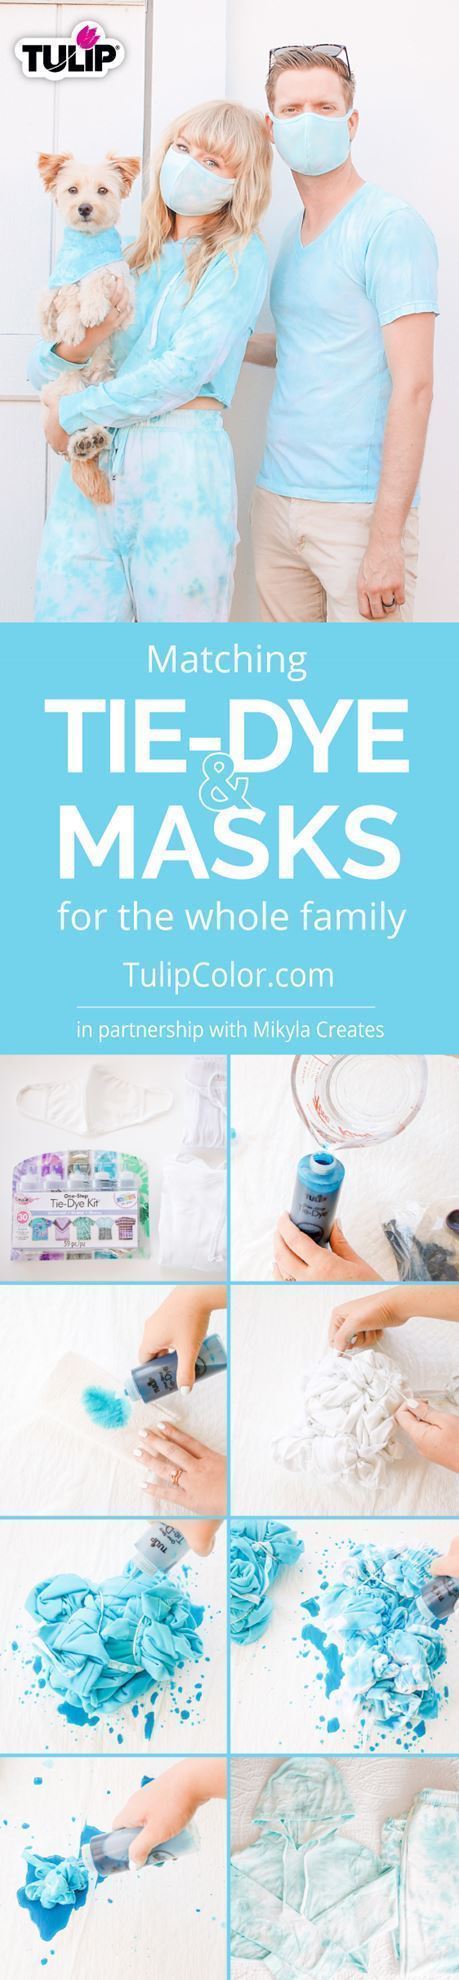 Tie Dye Matching Sweatsuits and Masks for the Whole Fam